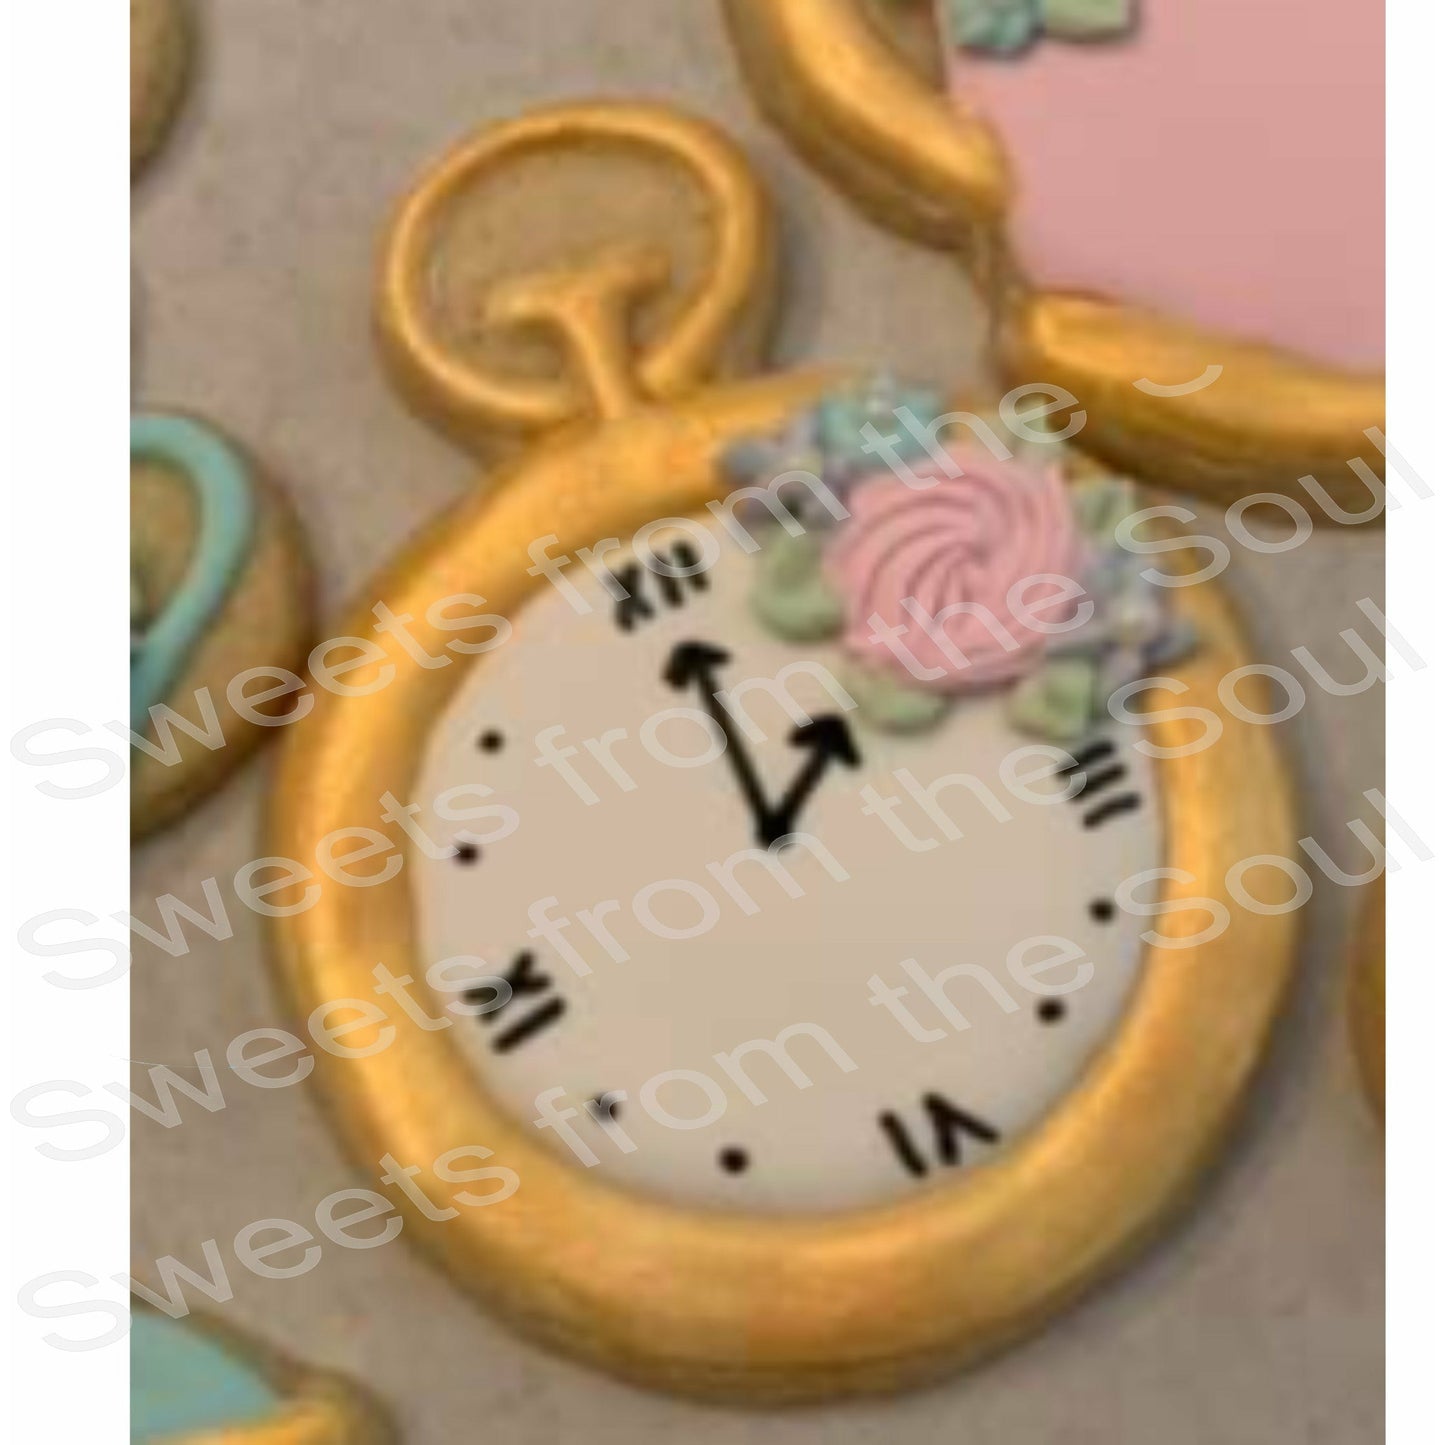 Pocket Watch Cookie Cutter or Ornament